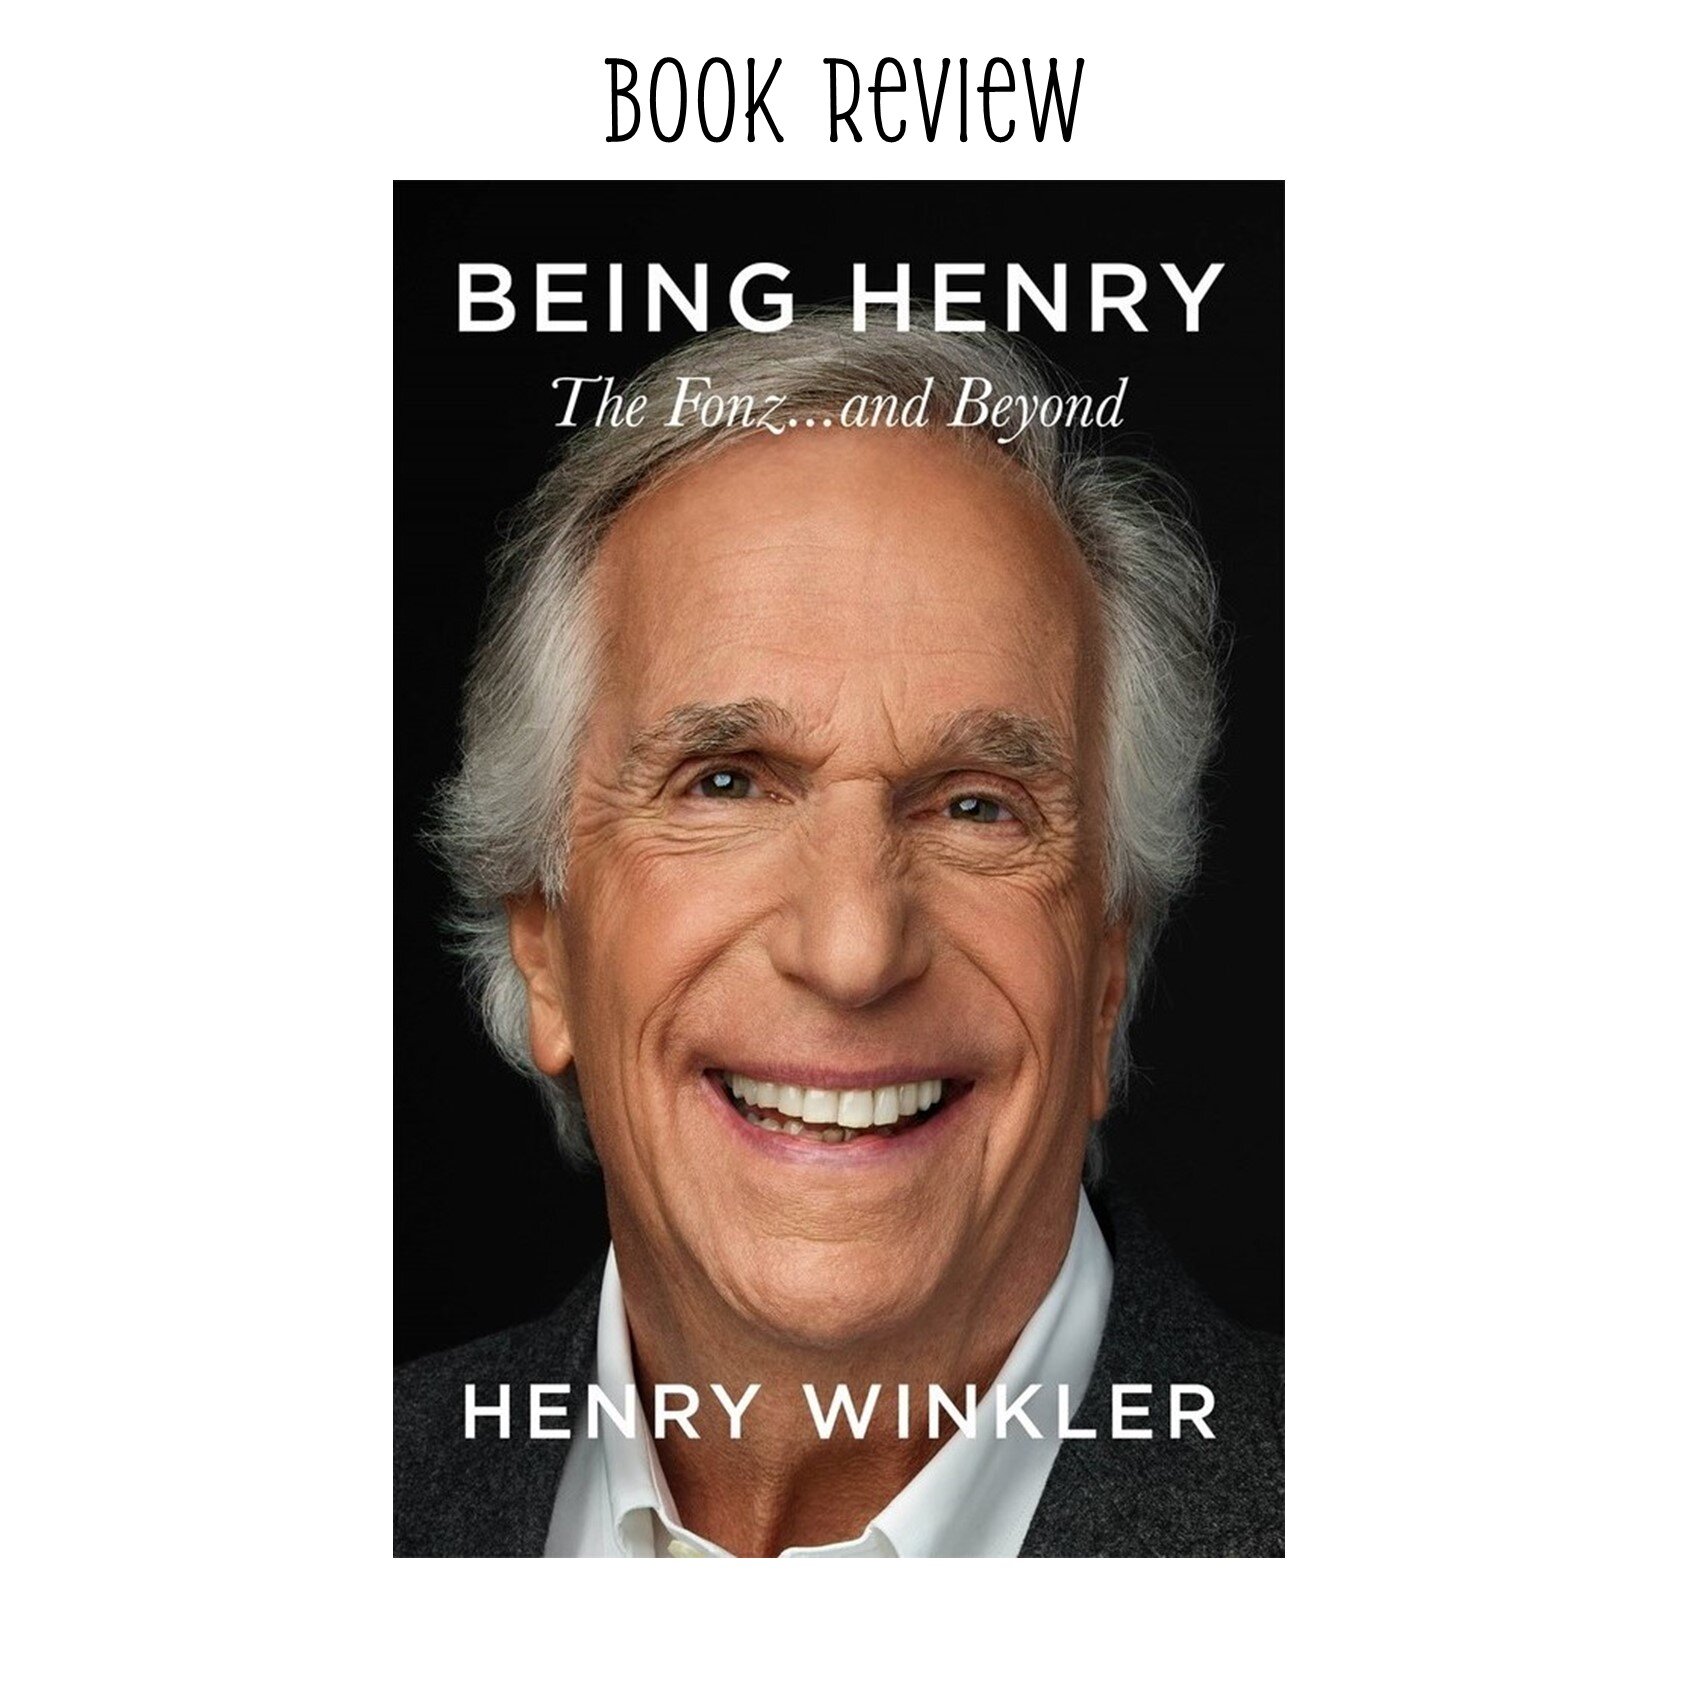 Book Review

&ldquo;BEING HENRY The Fonz&hellip;and Beyond&rdquo; by Henry Winkler

Henry Winkler is a legend. Not because he was the Fonz (though that does put him right up there), but because of the way he eventually overcomes his personal insecuri